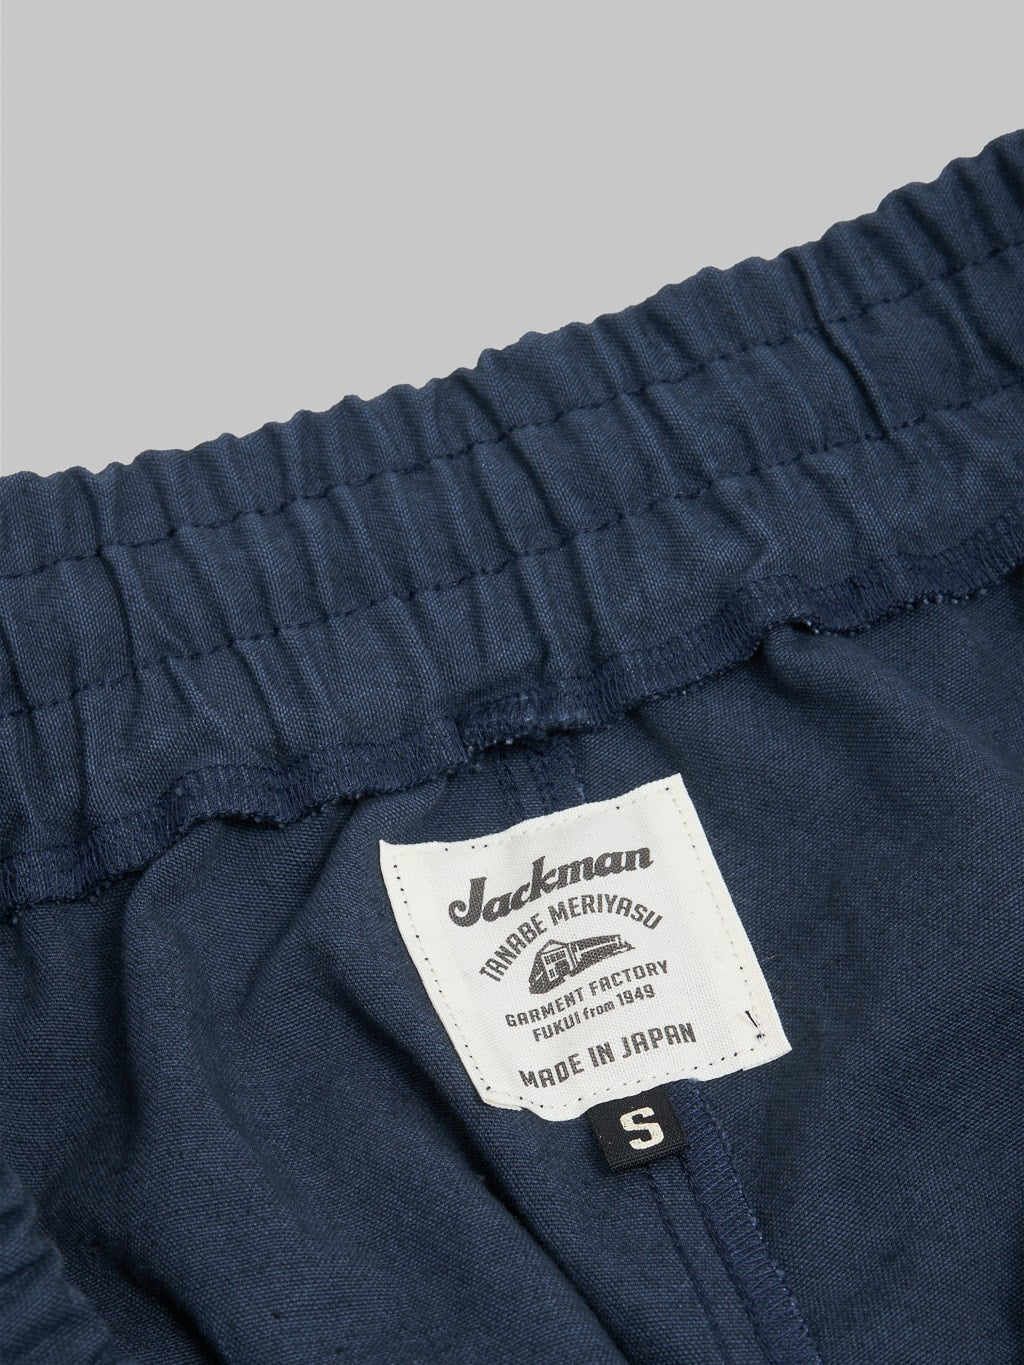 Jackman Canvas Rookie Pants Navy sulfur dyed tag